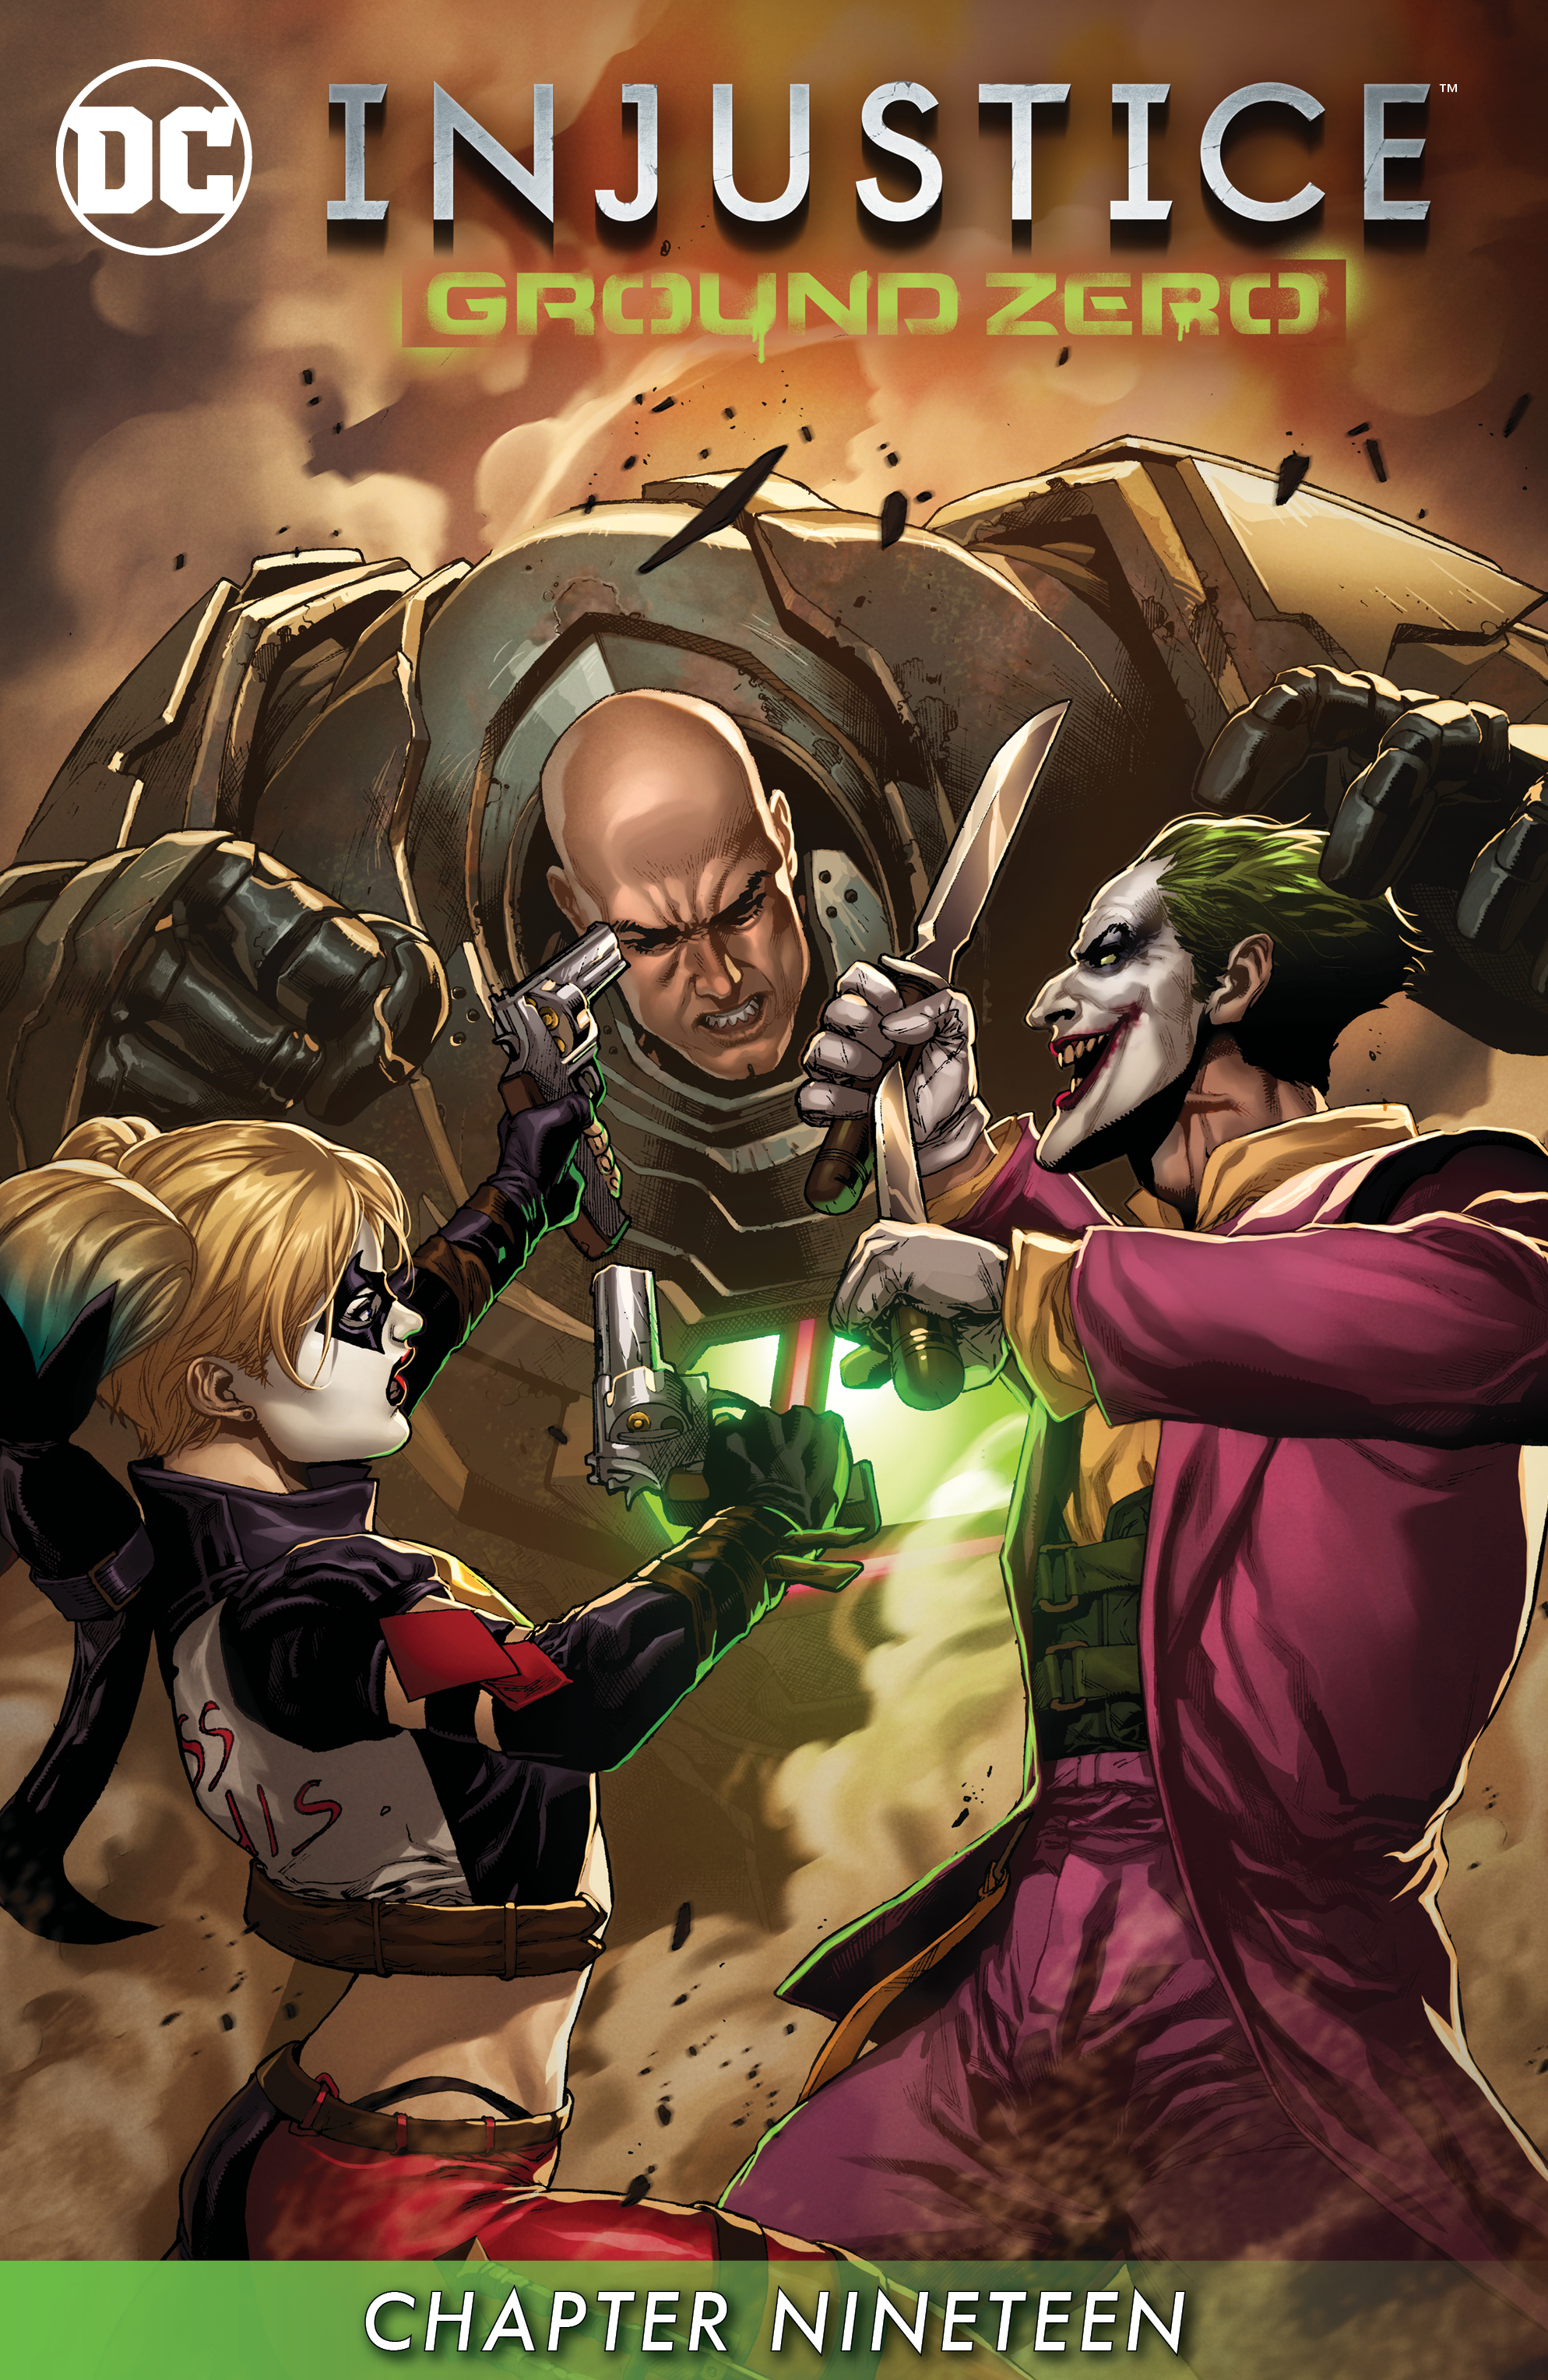 Injustice: Ground Zero #19 preview images